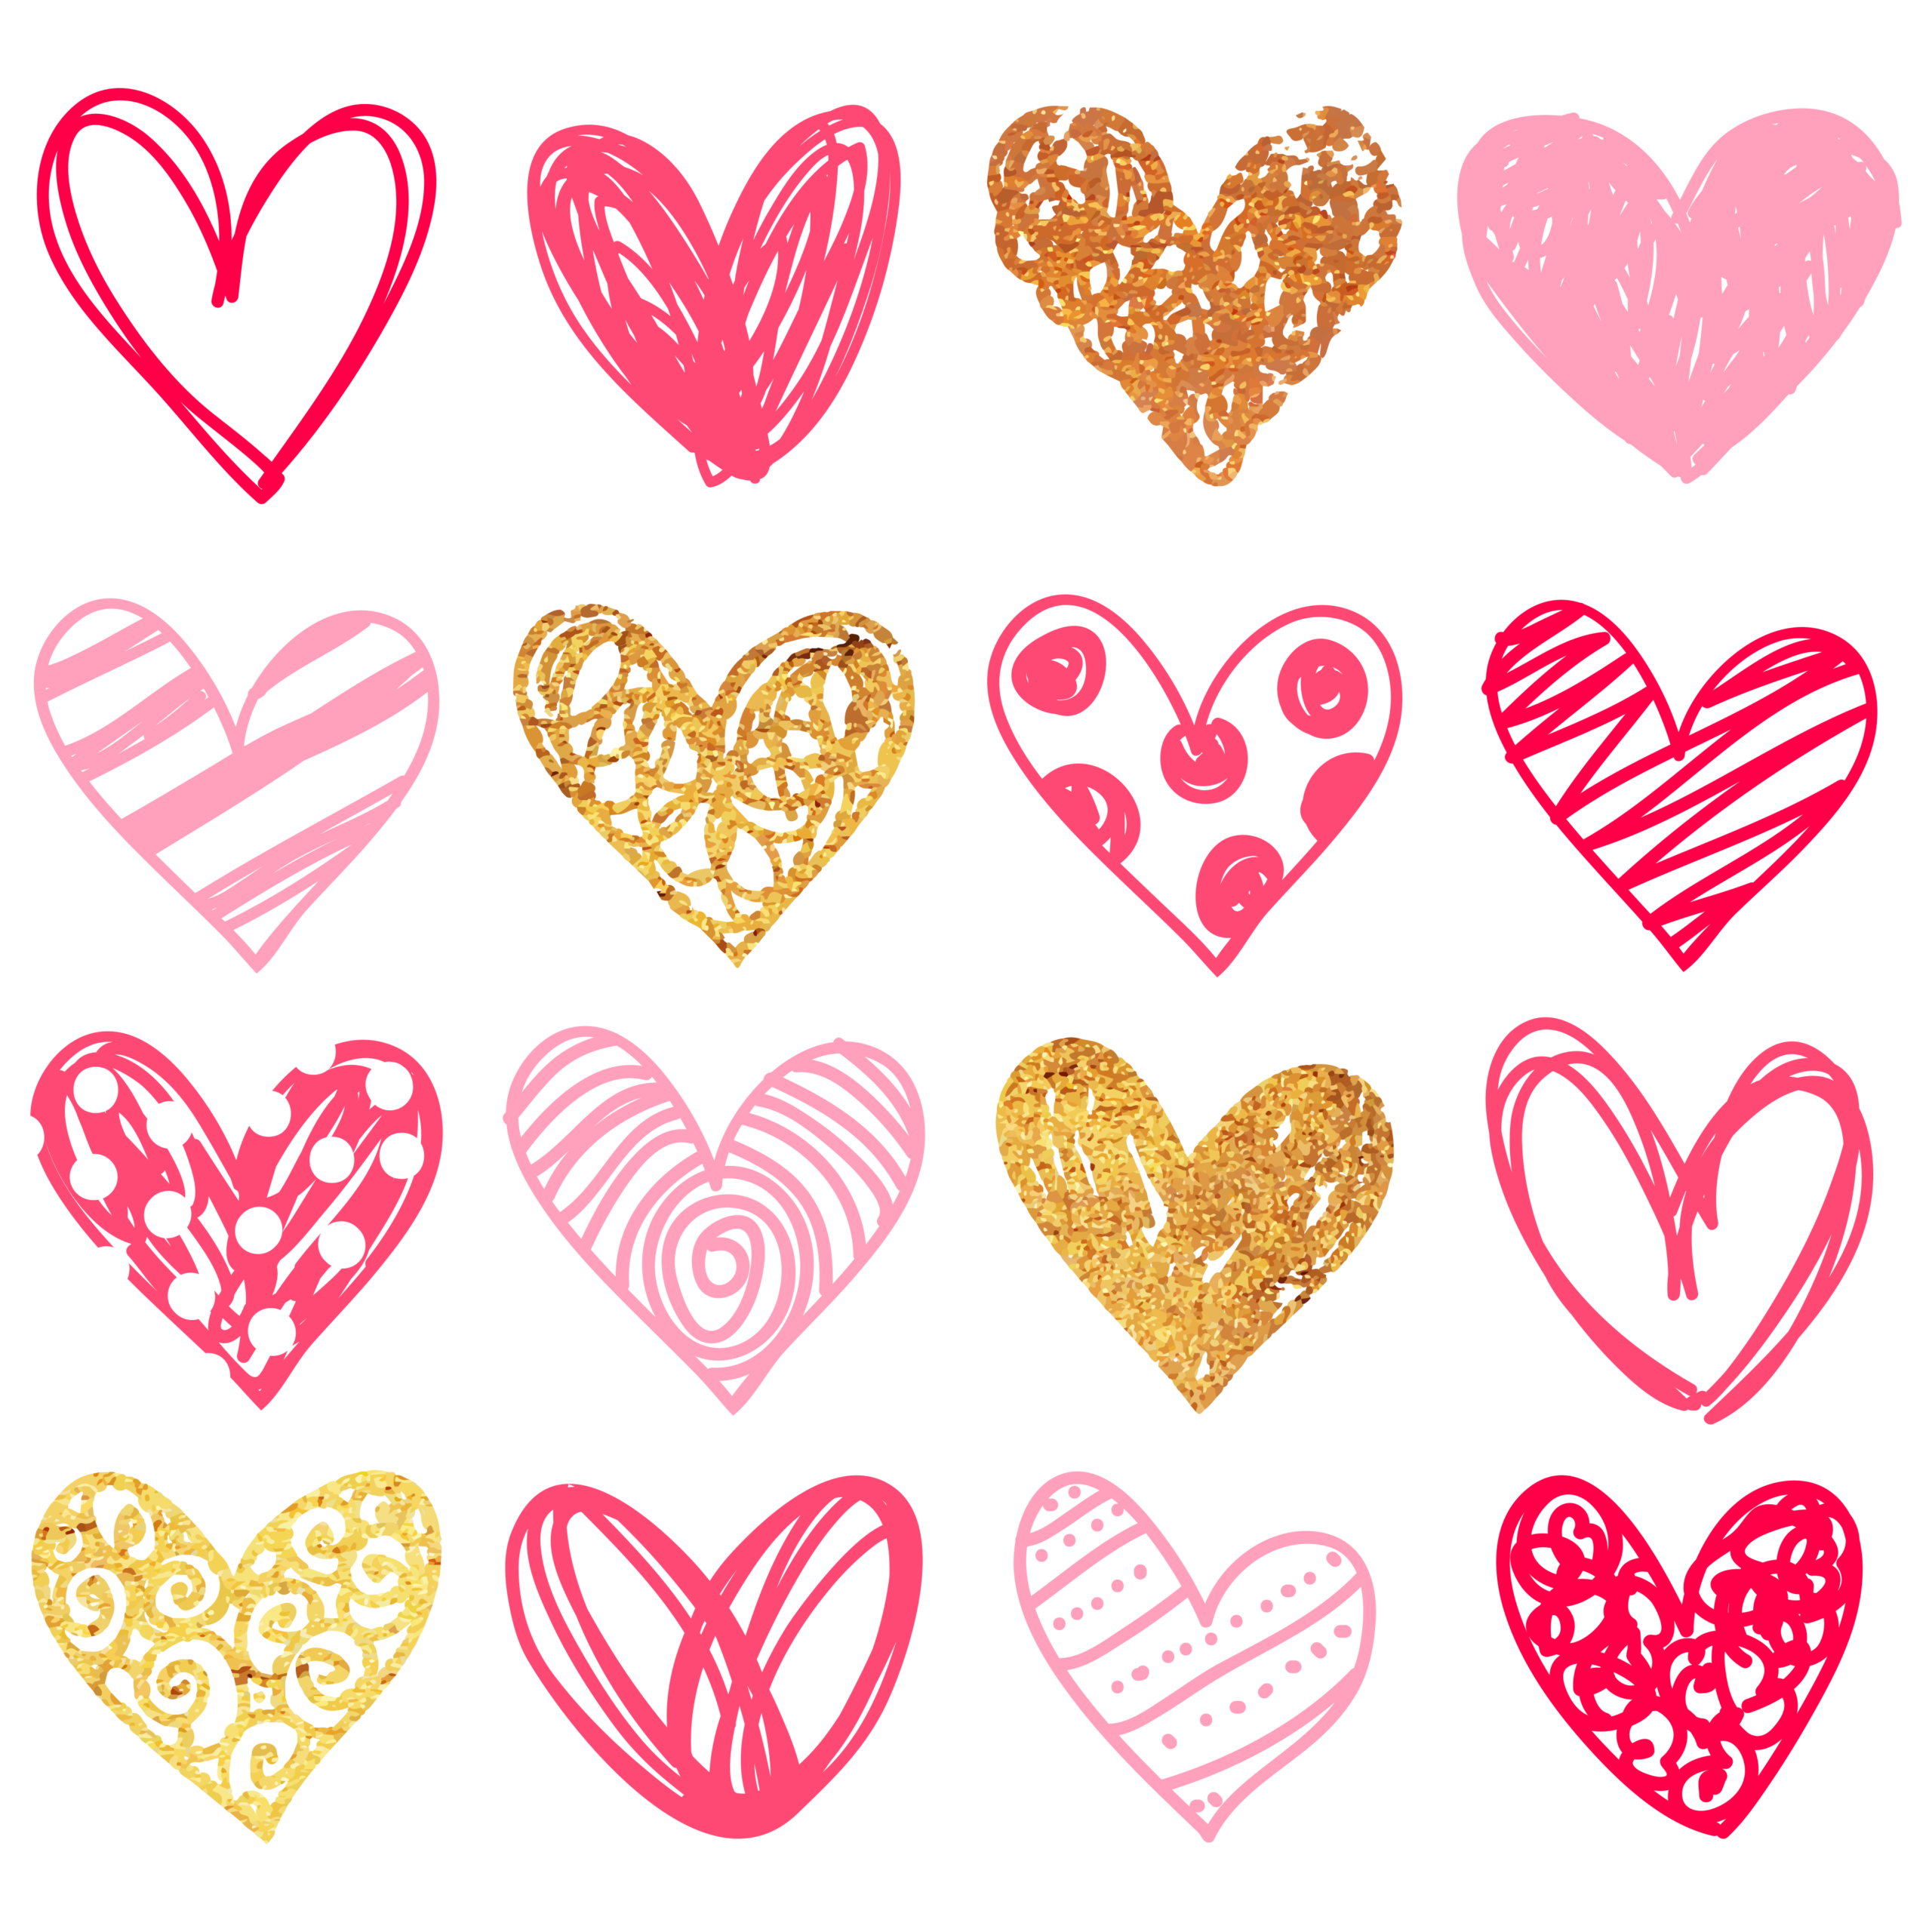 Two Red Hearts PNG Clipart - Best WEB Clipart